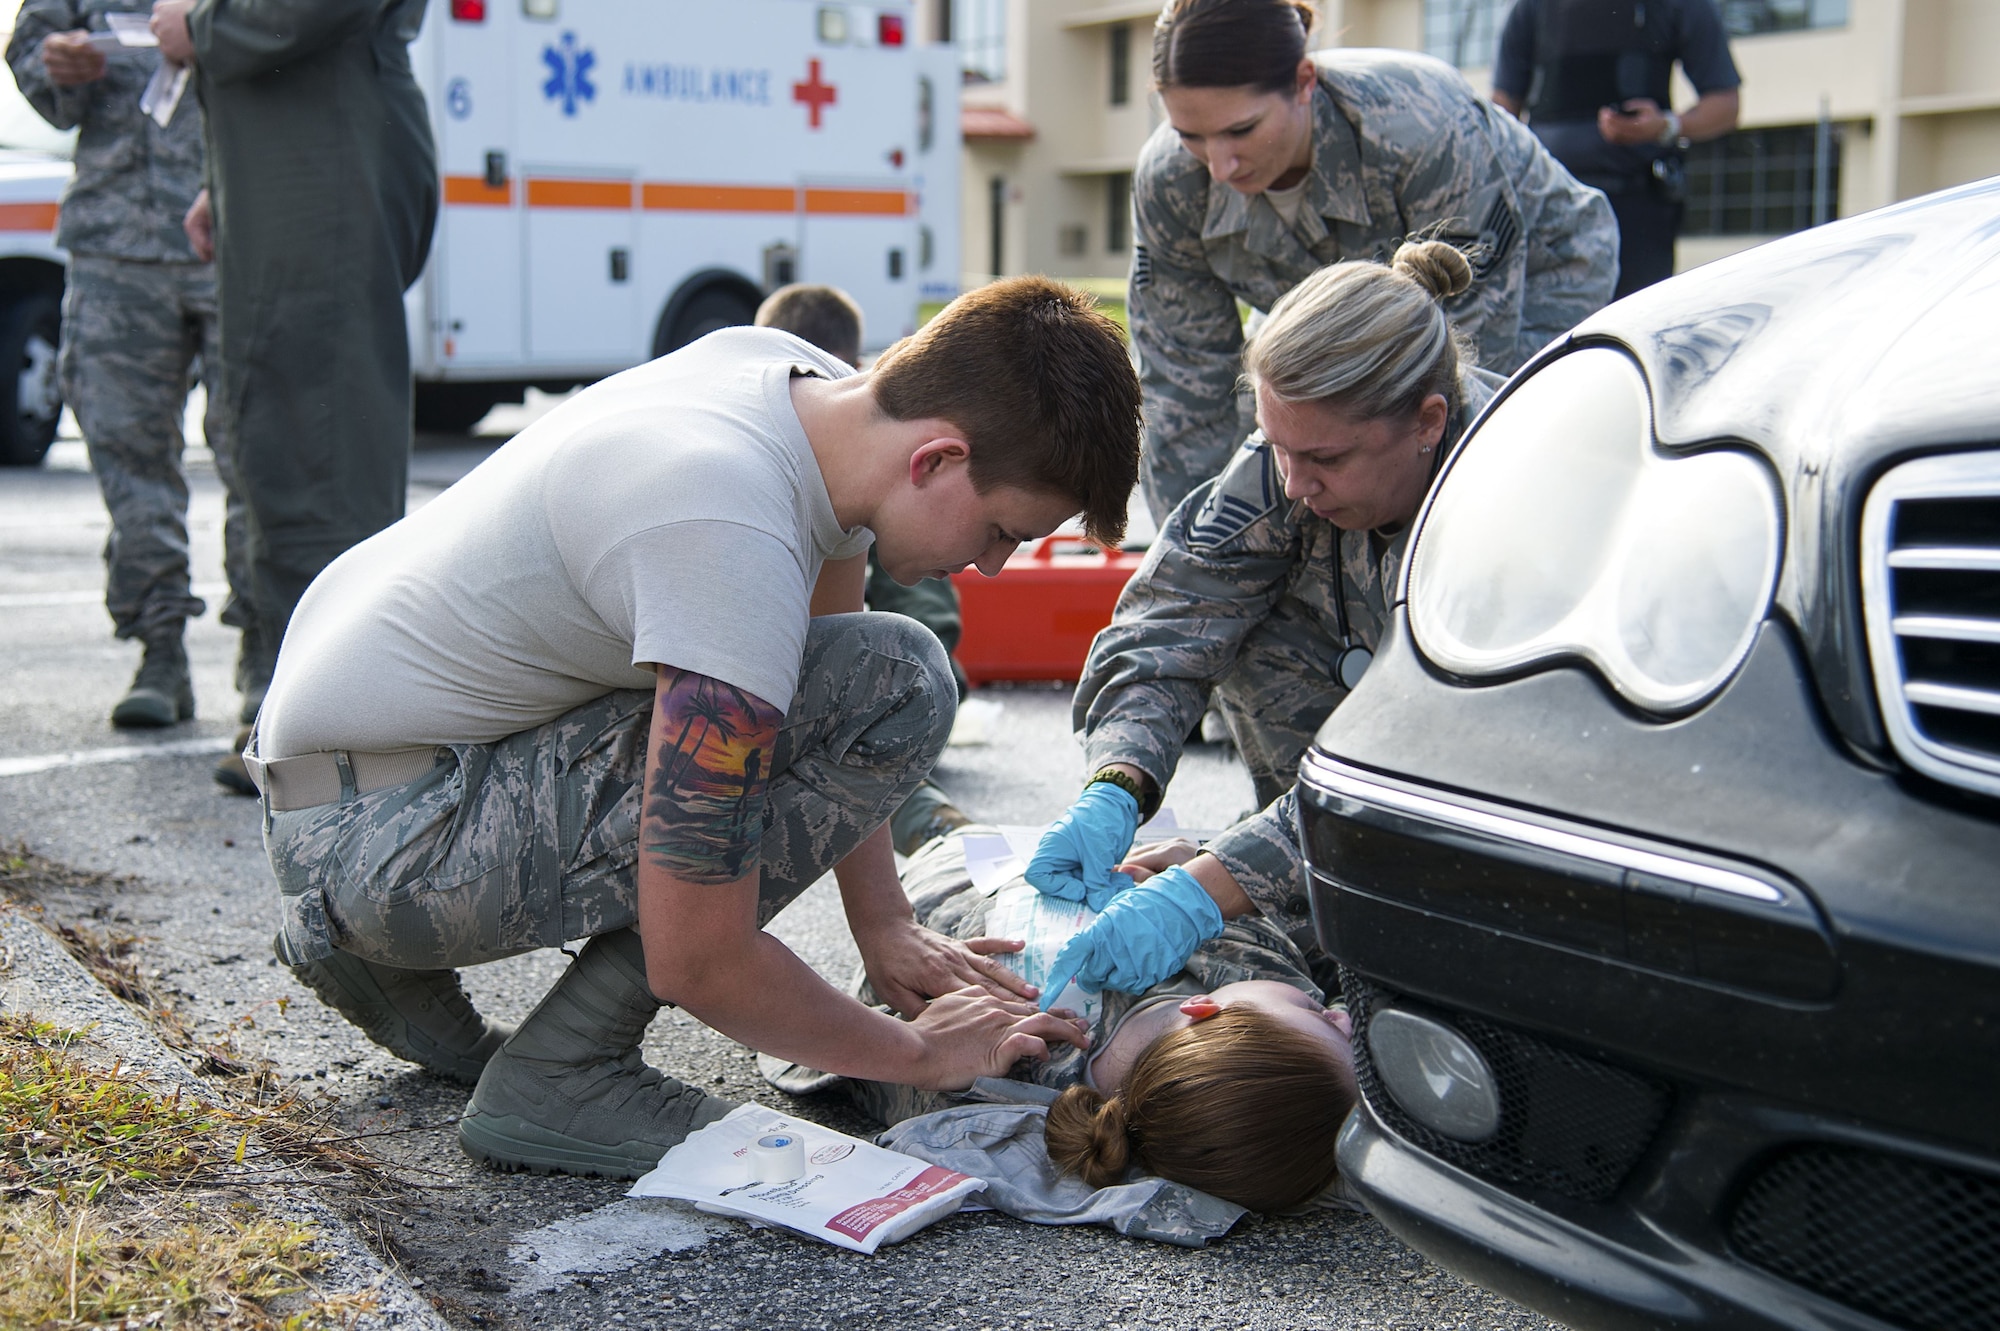 U.S. Air Force Airman 1st Class Stephanie Smith, an aviation resource manager assigned to the 6th Operations Support Squadron, receives medical treatment for a simulated gunshot wound during an active shooter exercise at MacDill Air Force Base, Fla., Jan. 9, 2017. The exercise was a way for the participating teams to practice effective teamwork and communication during a frantic situation.